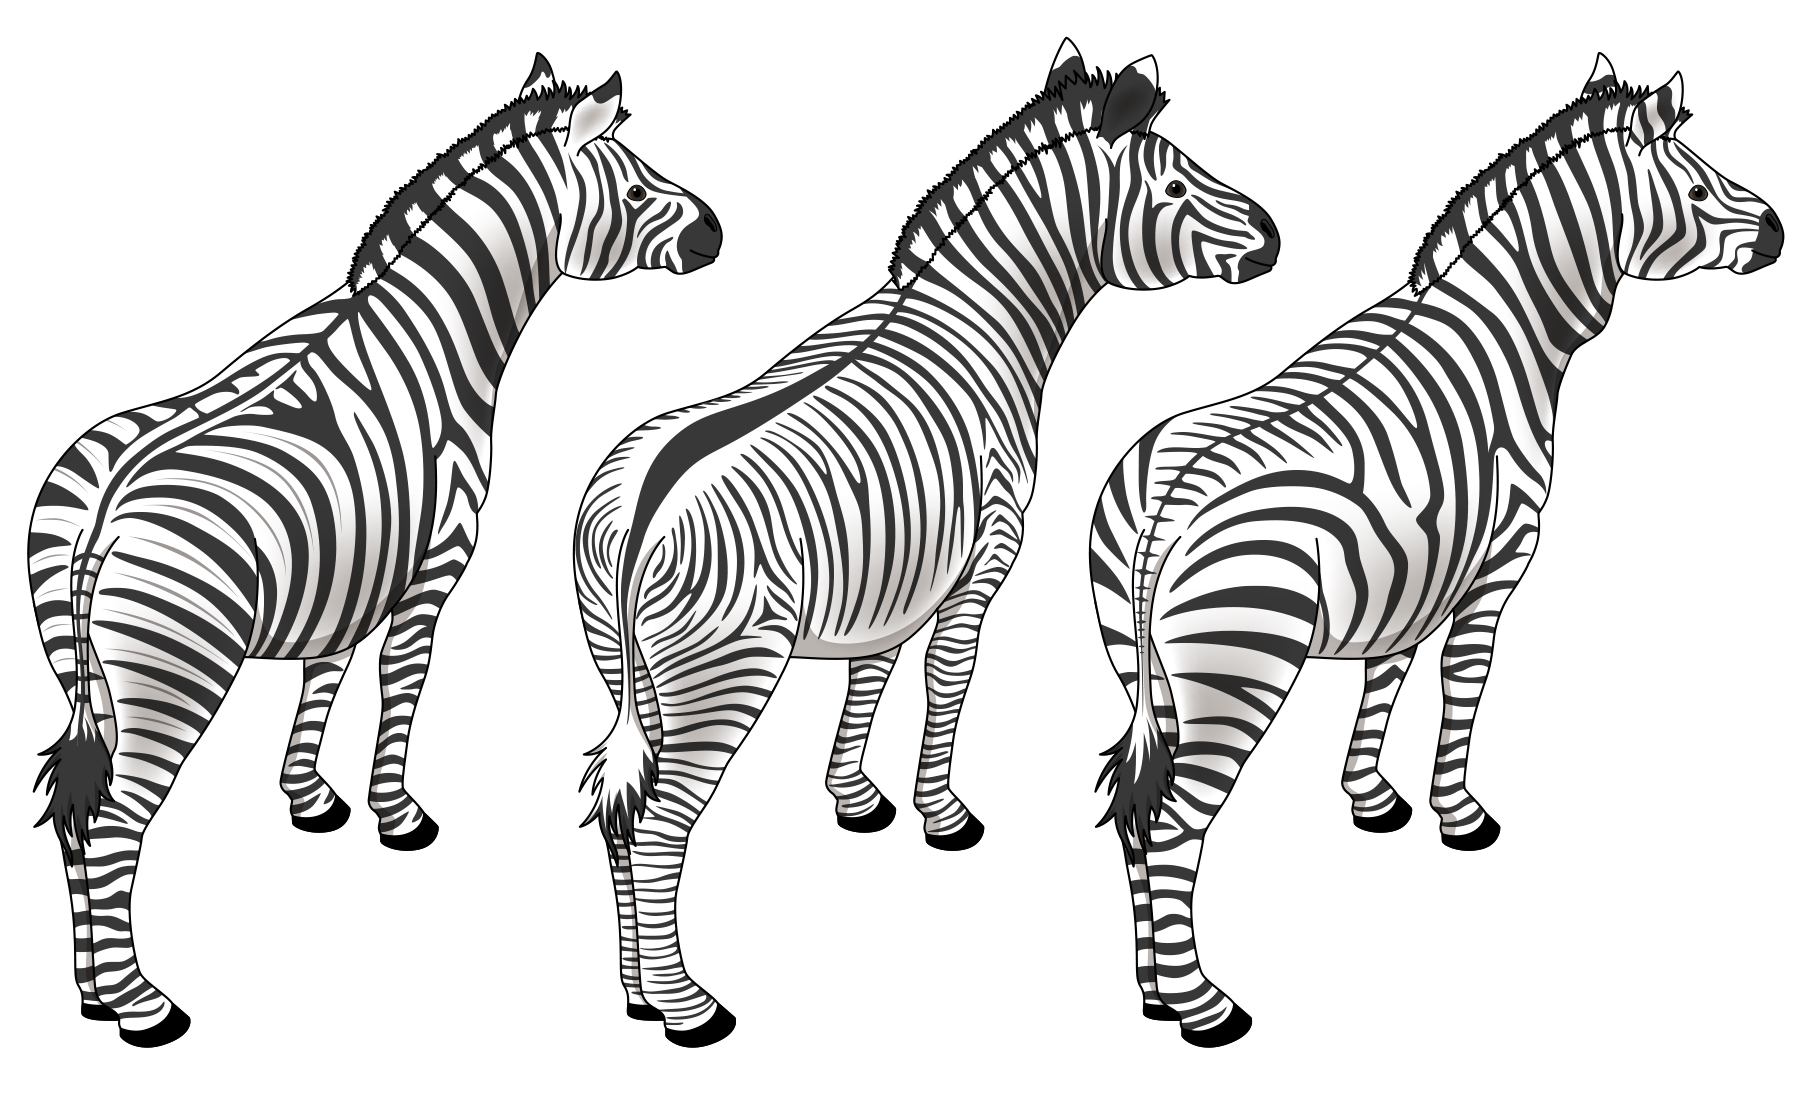 three species of zebras, all with different stripes